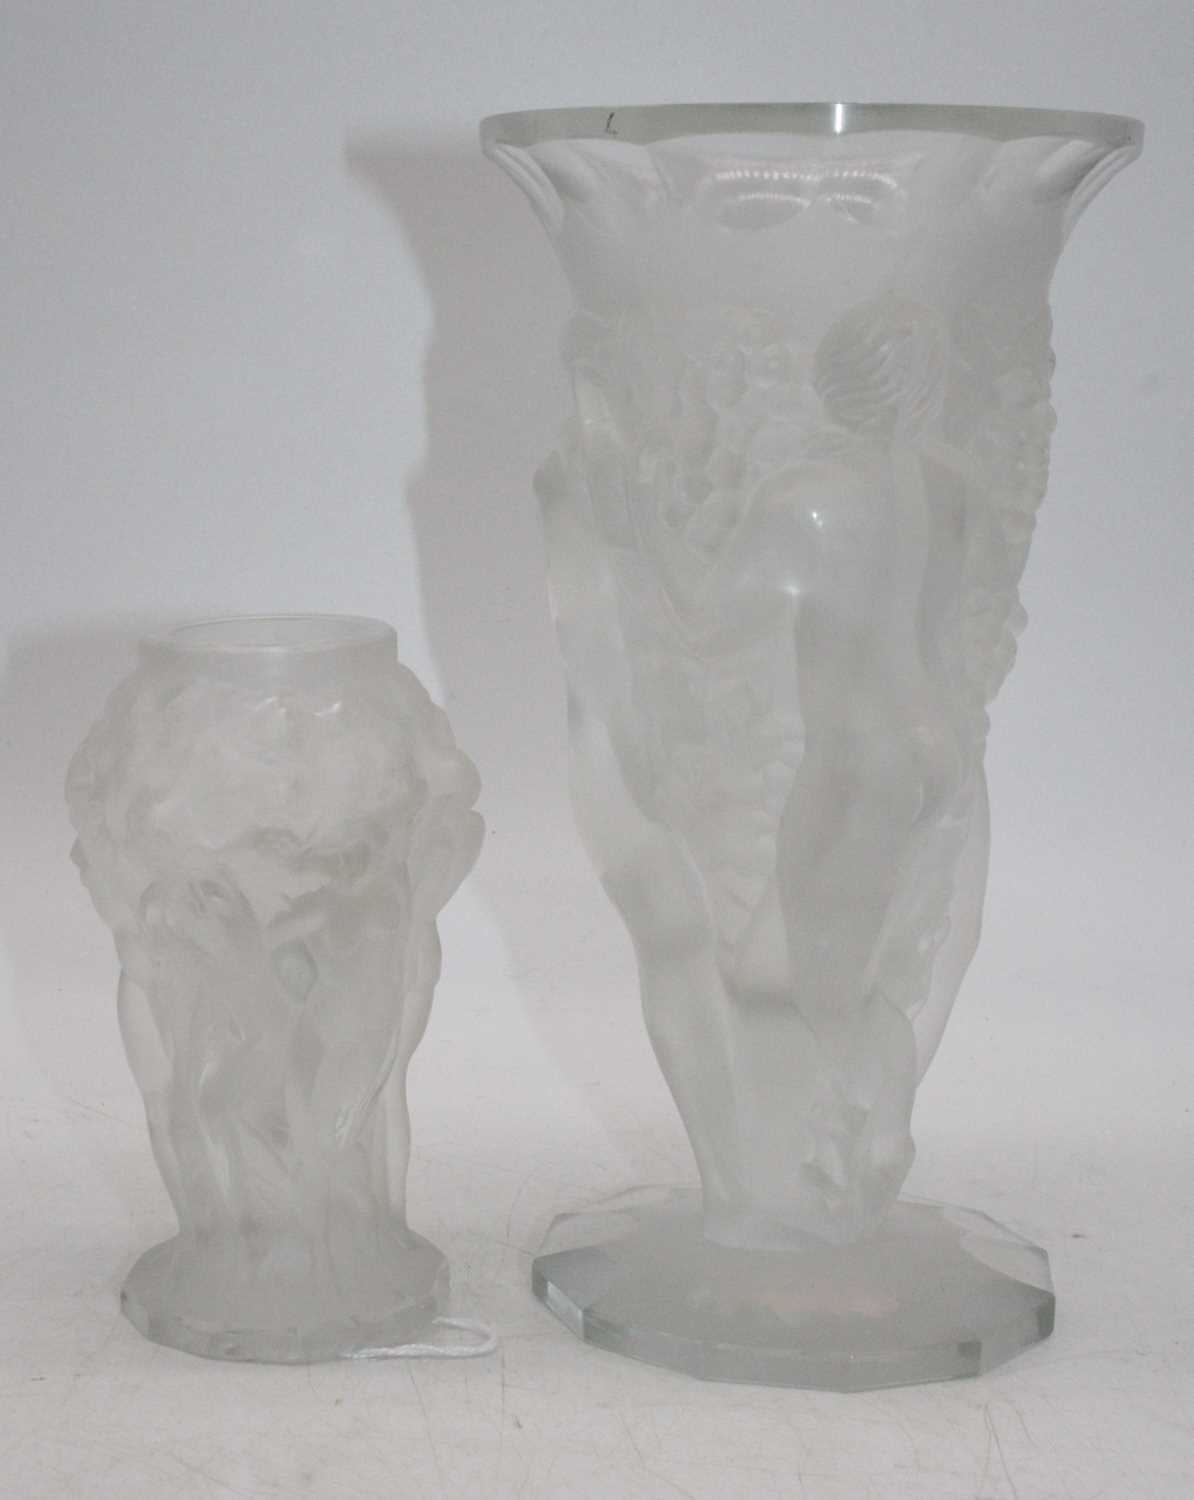 An early 20th century Czechoslovakian frosted glass vase by the Densa Glass Company, having a flared